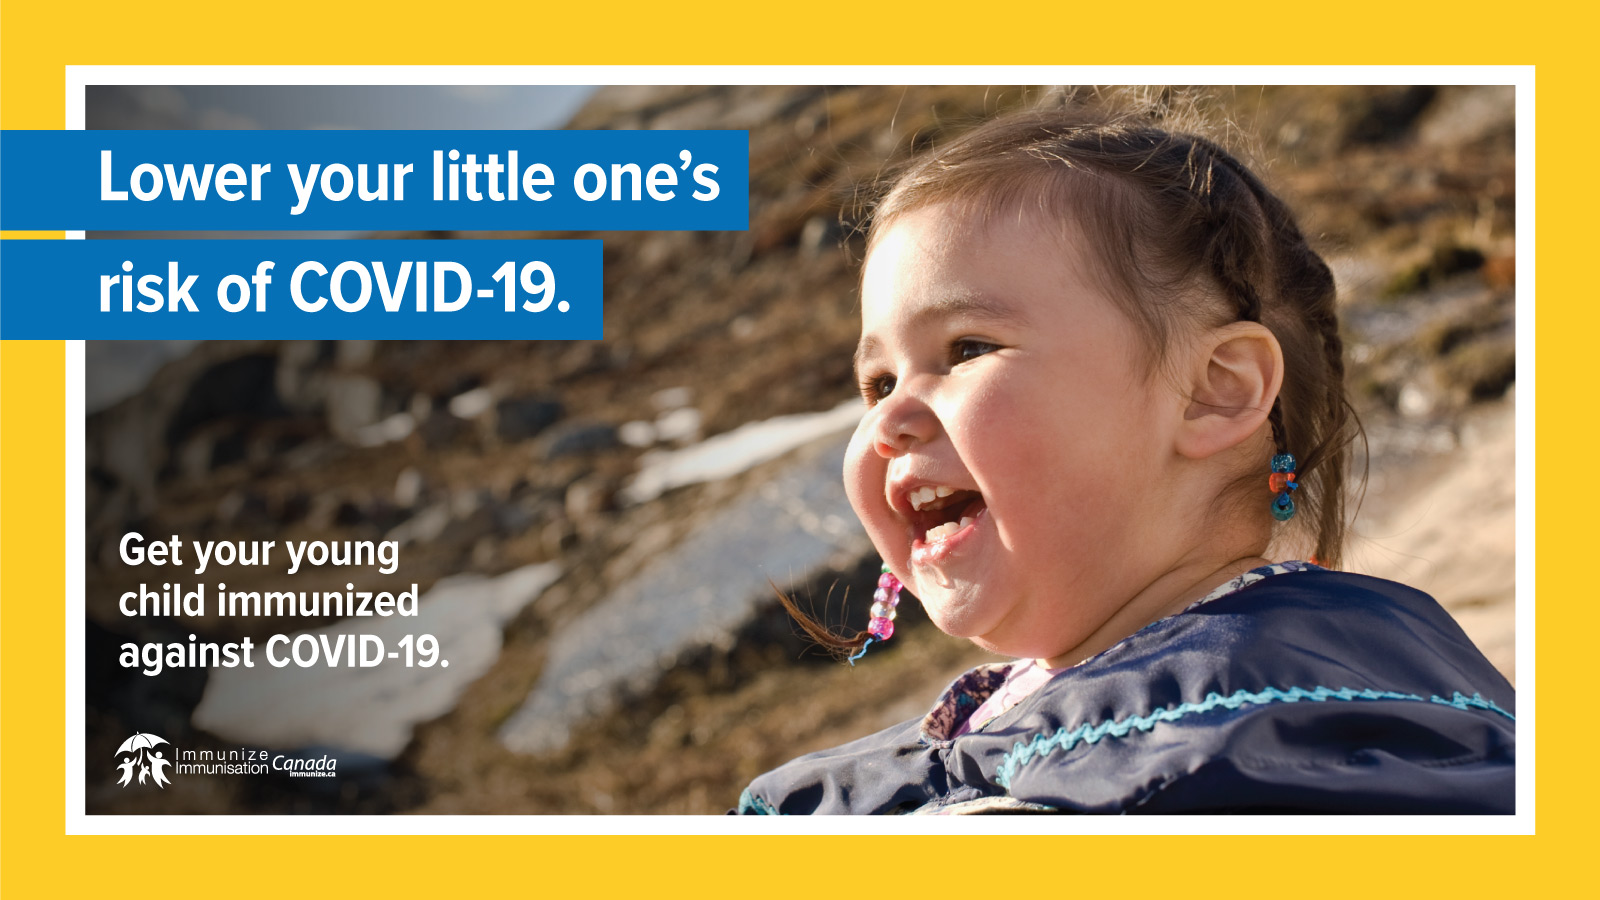 Lower your little one's risk of COVID-19 (image 4 - Twitter)